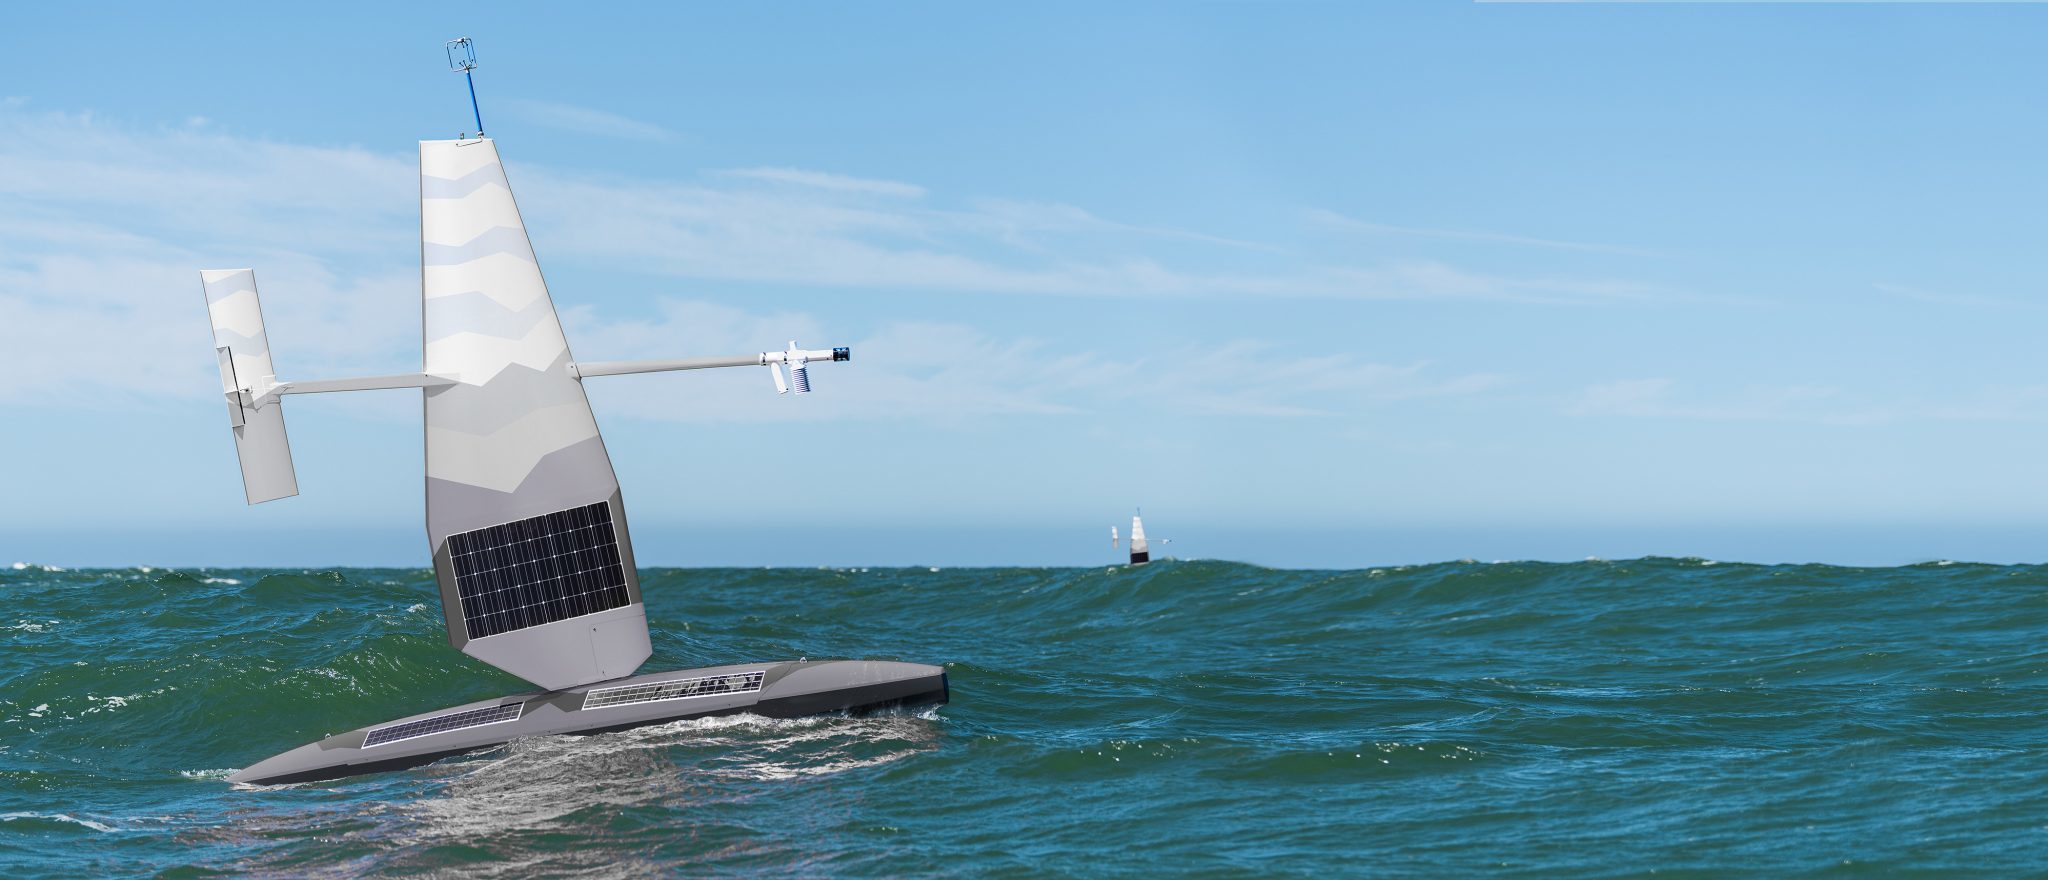 The Saildrone Voyager Can Provide Constant Protection At Sea